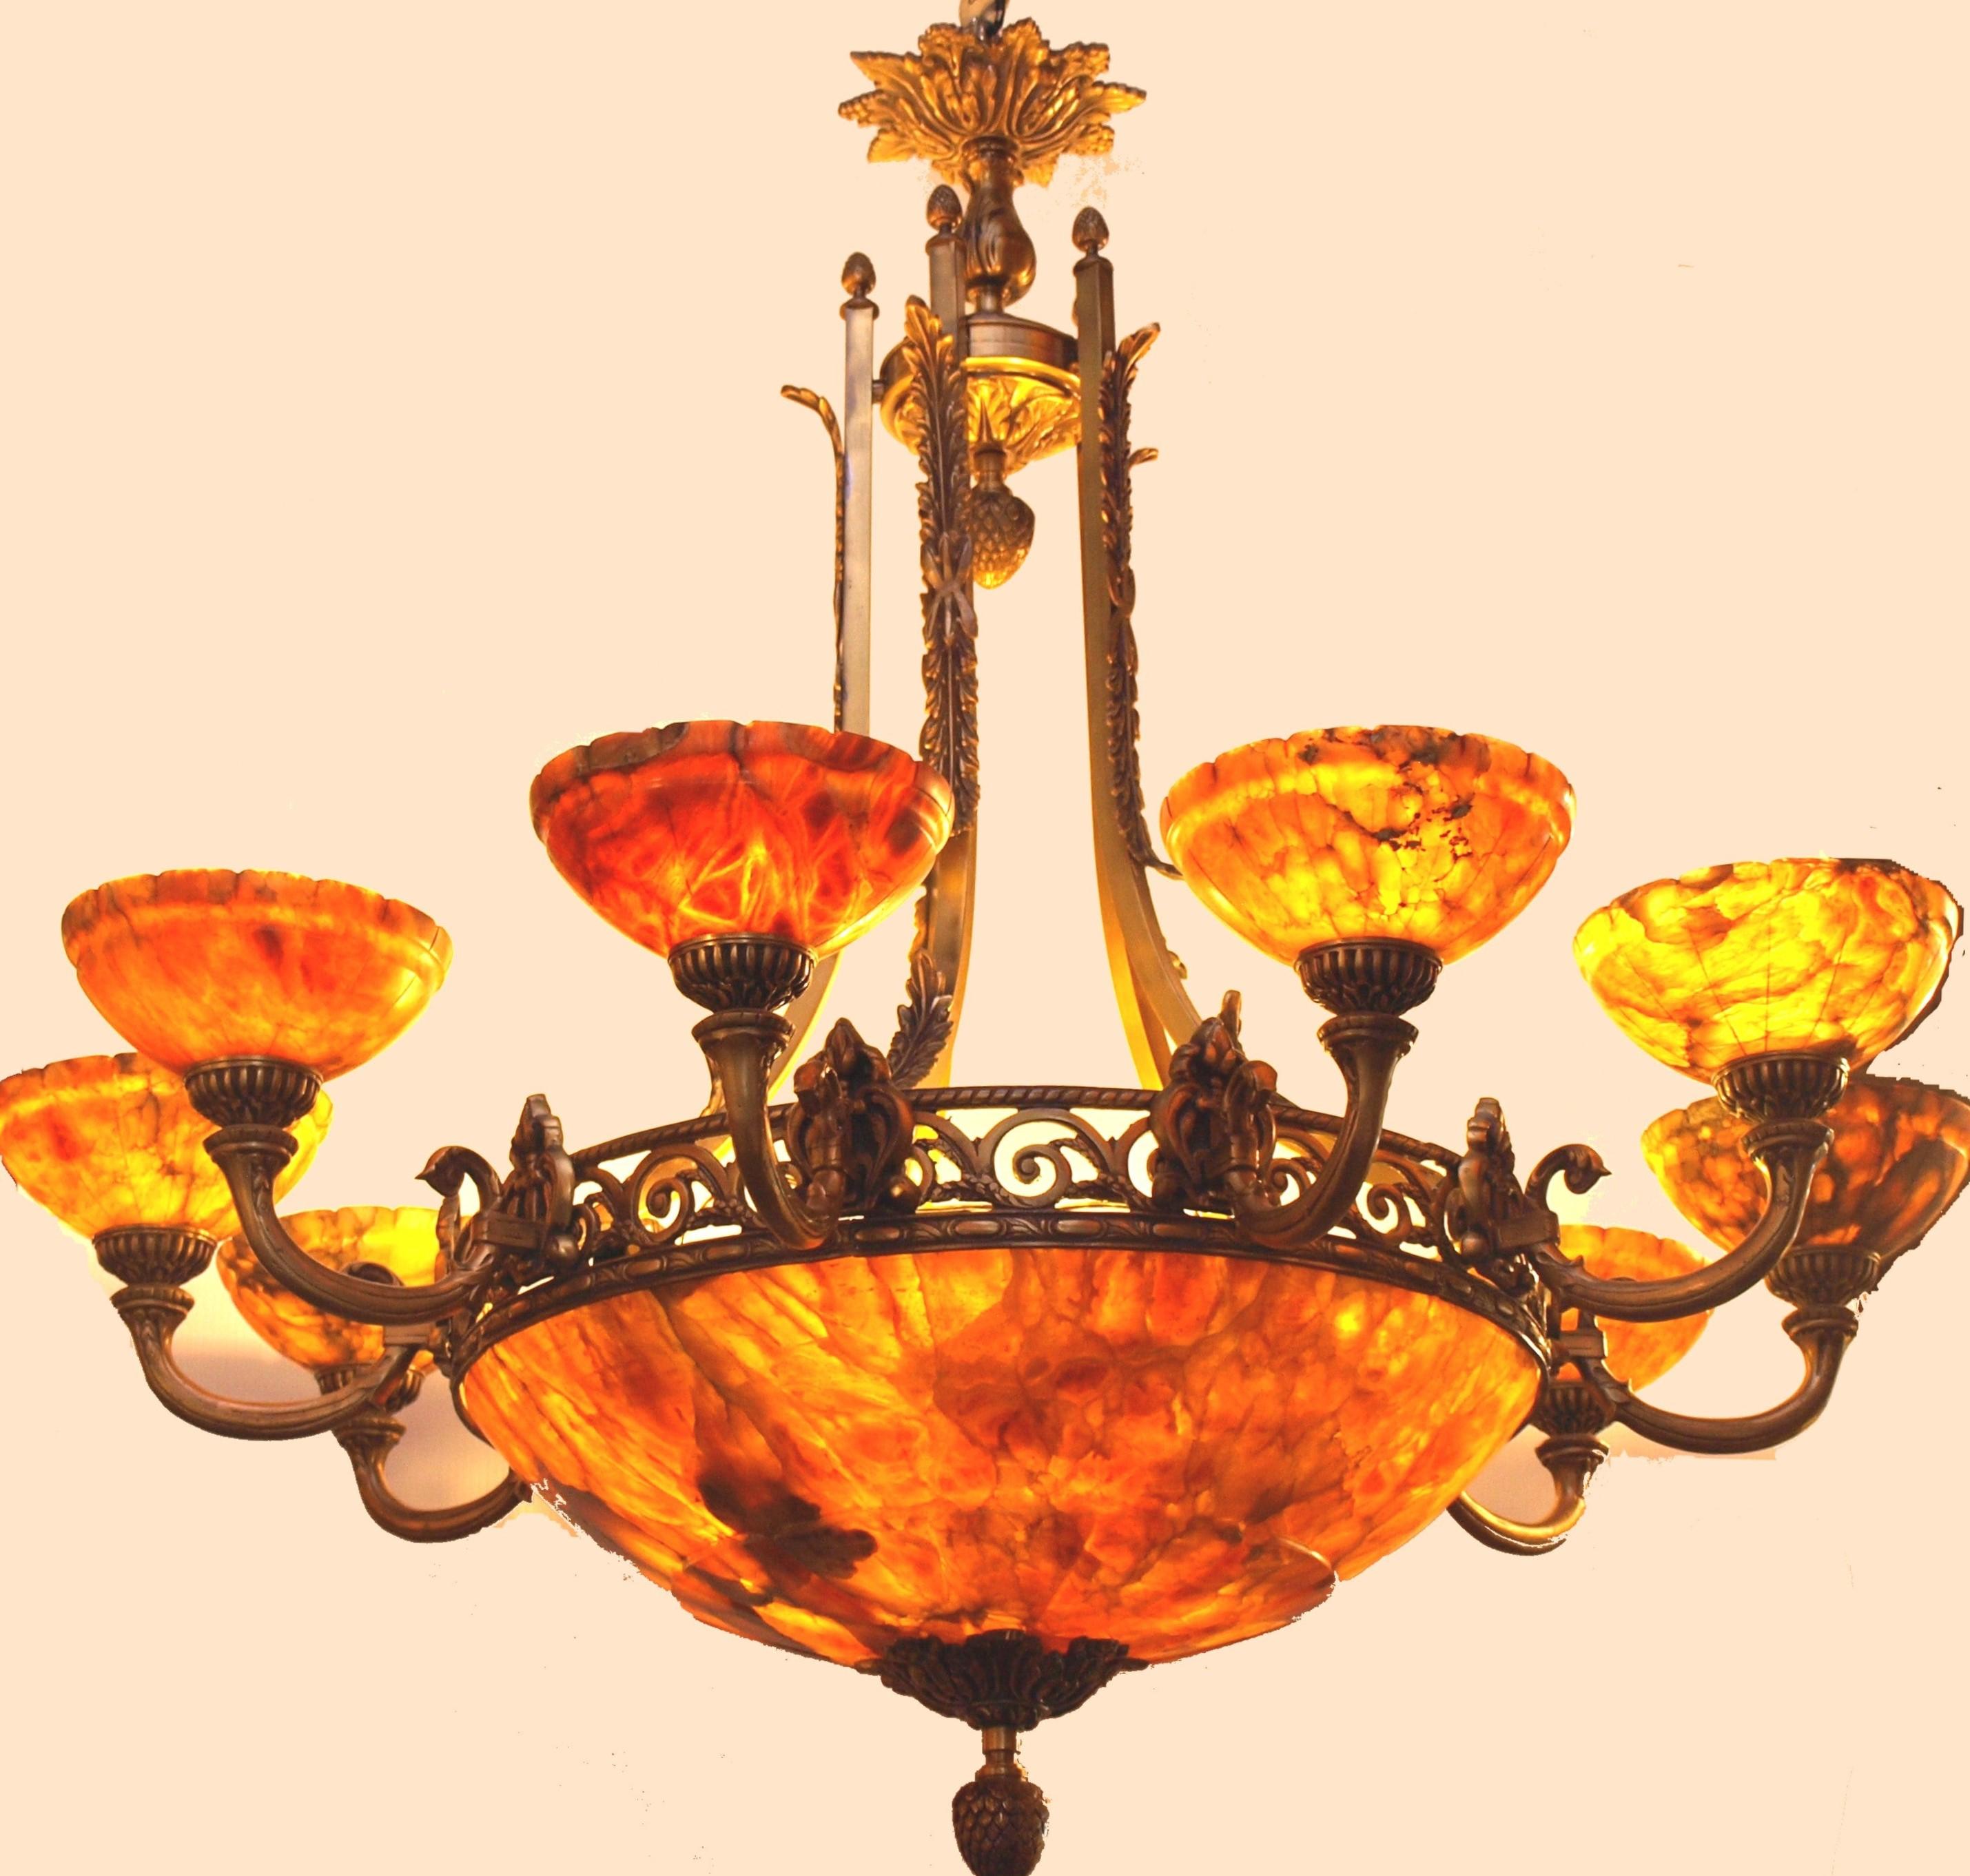 A very fine bronze & Alabaster chandelier. France, circa 1930. 12 Lights (10 outside & 2 inside)
Dimensions: Height 42